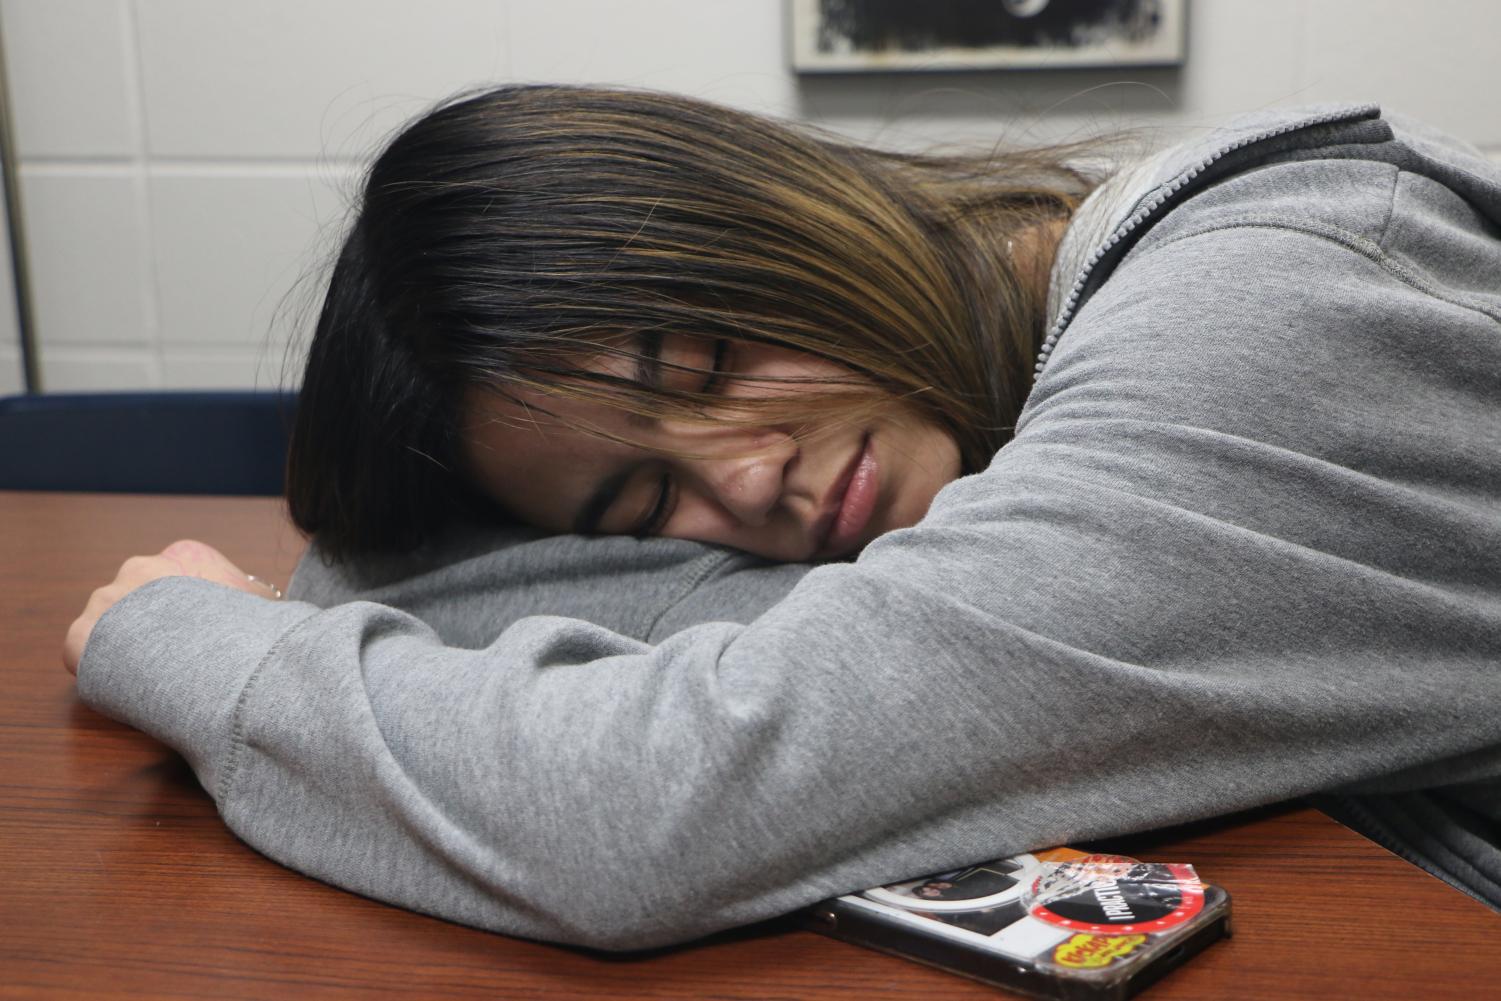 Sophomore Abbygale “Abby” Karpinski naps on a desk during SSRT on March 14, 2023. Karpinski said that due to the number of classes she is taking she is often overwhelmed with the amount of work she has to do.